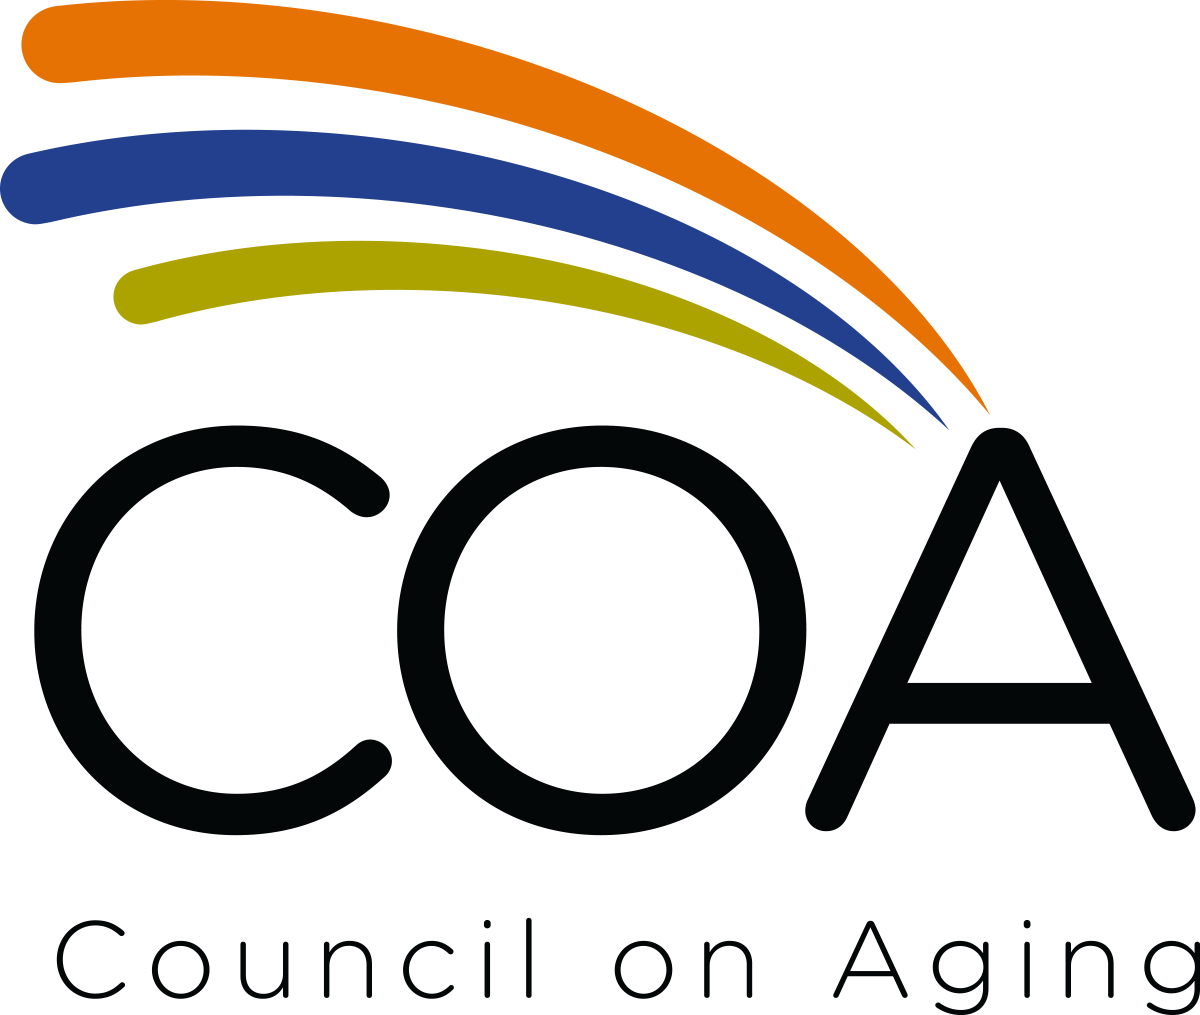 Council on Aging of Southwest Ohio, Eldercare Connections